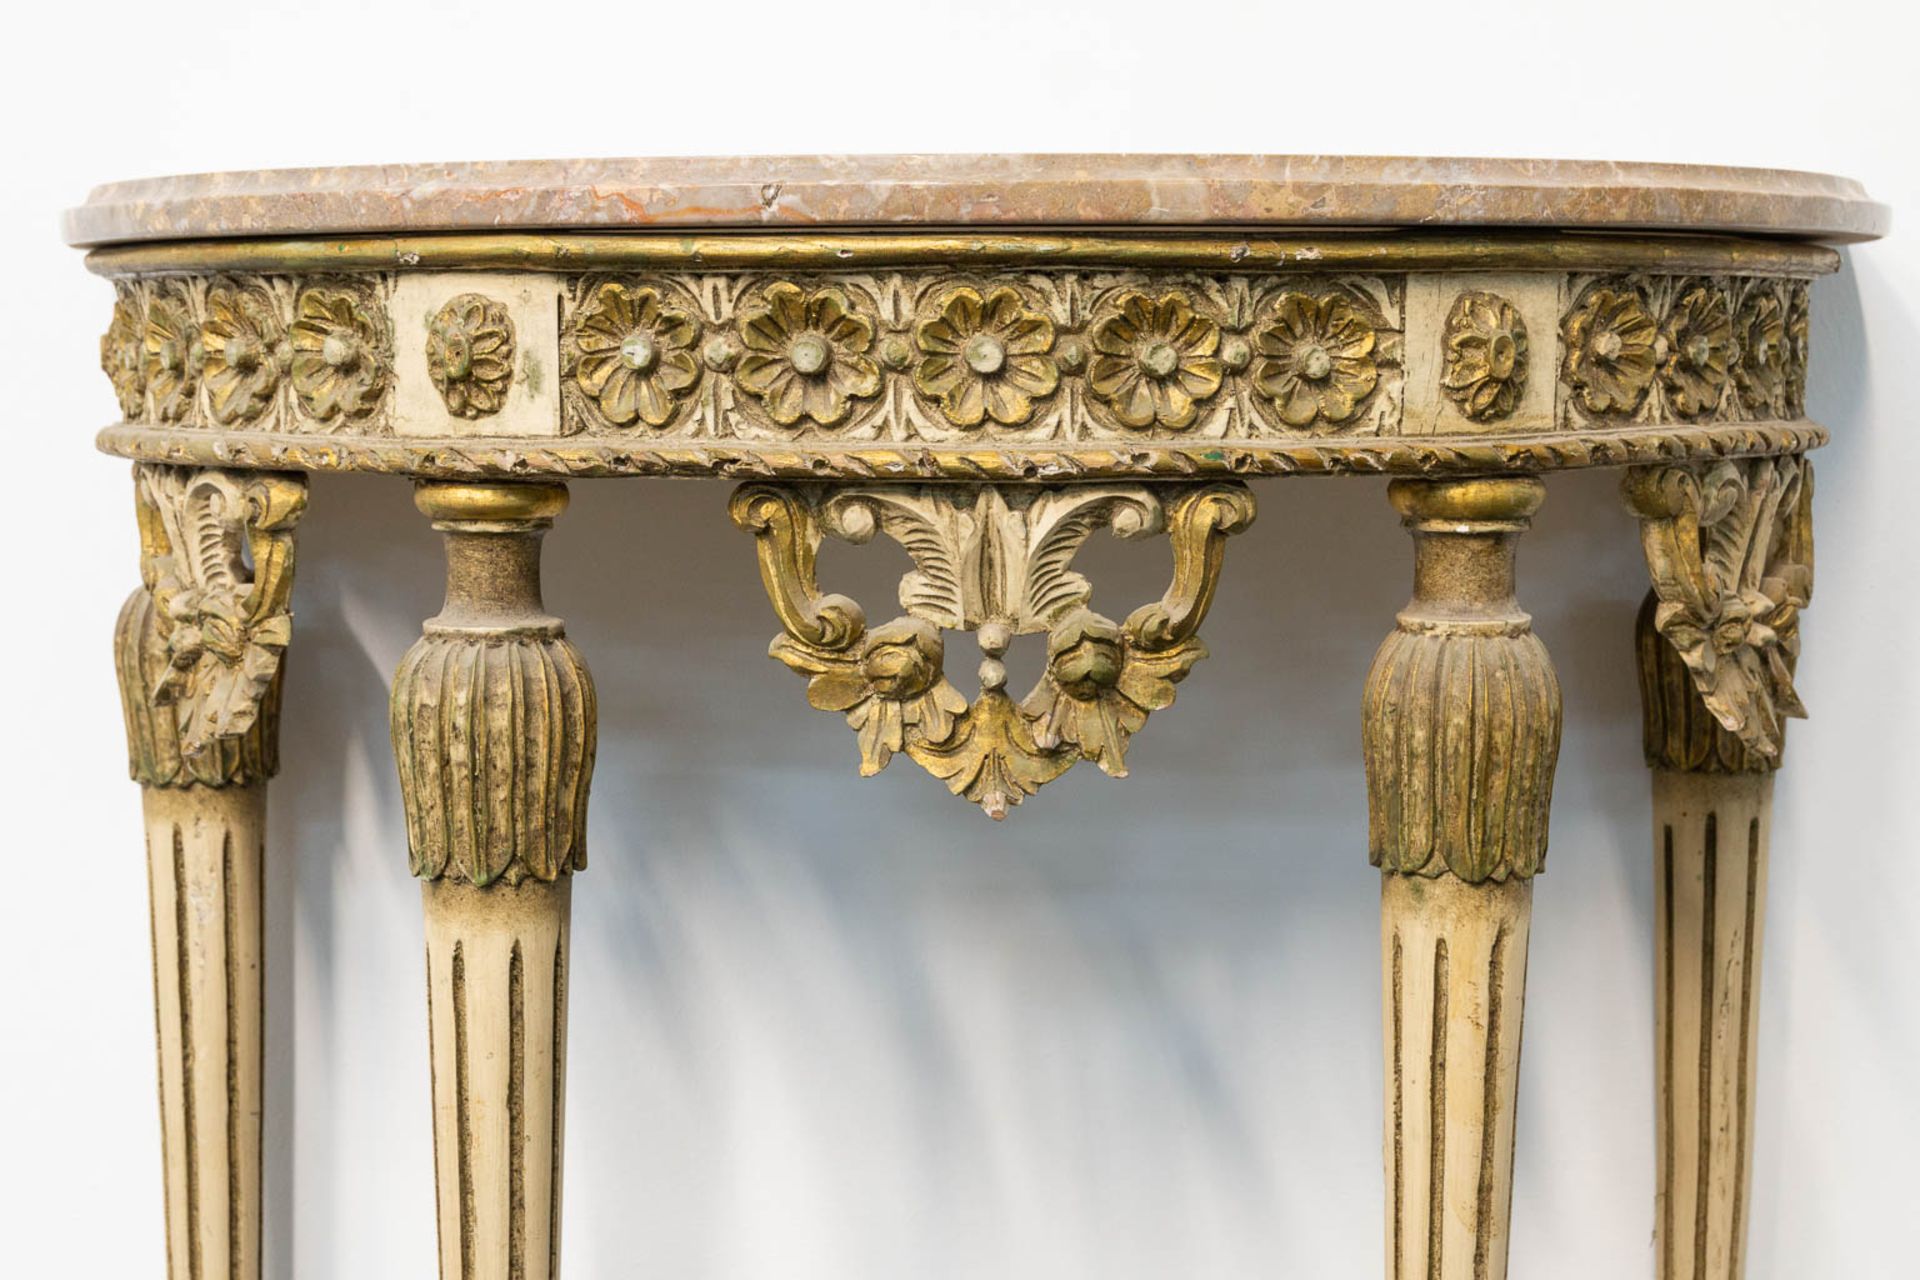 A Louis XVI style console table with marble top and sculptured wood decorations. - Image 11 of 12